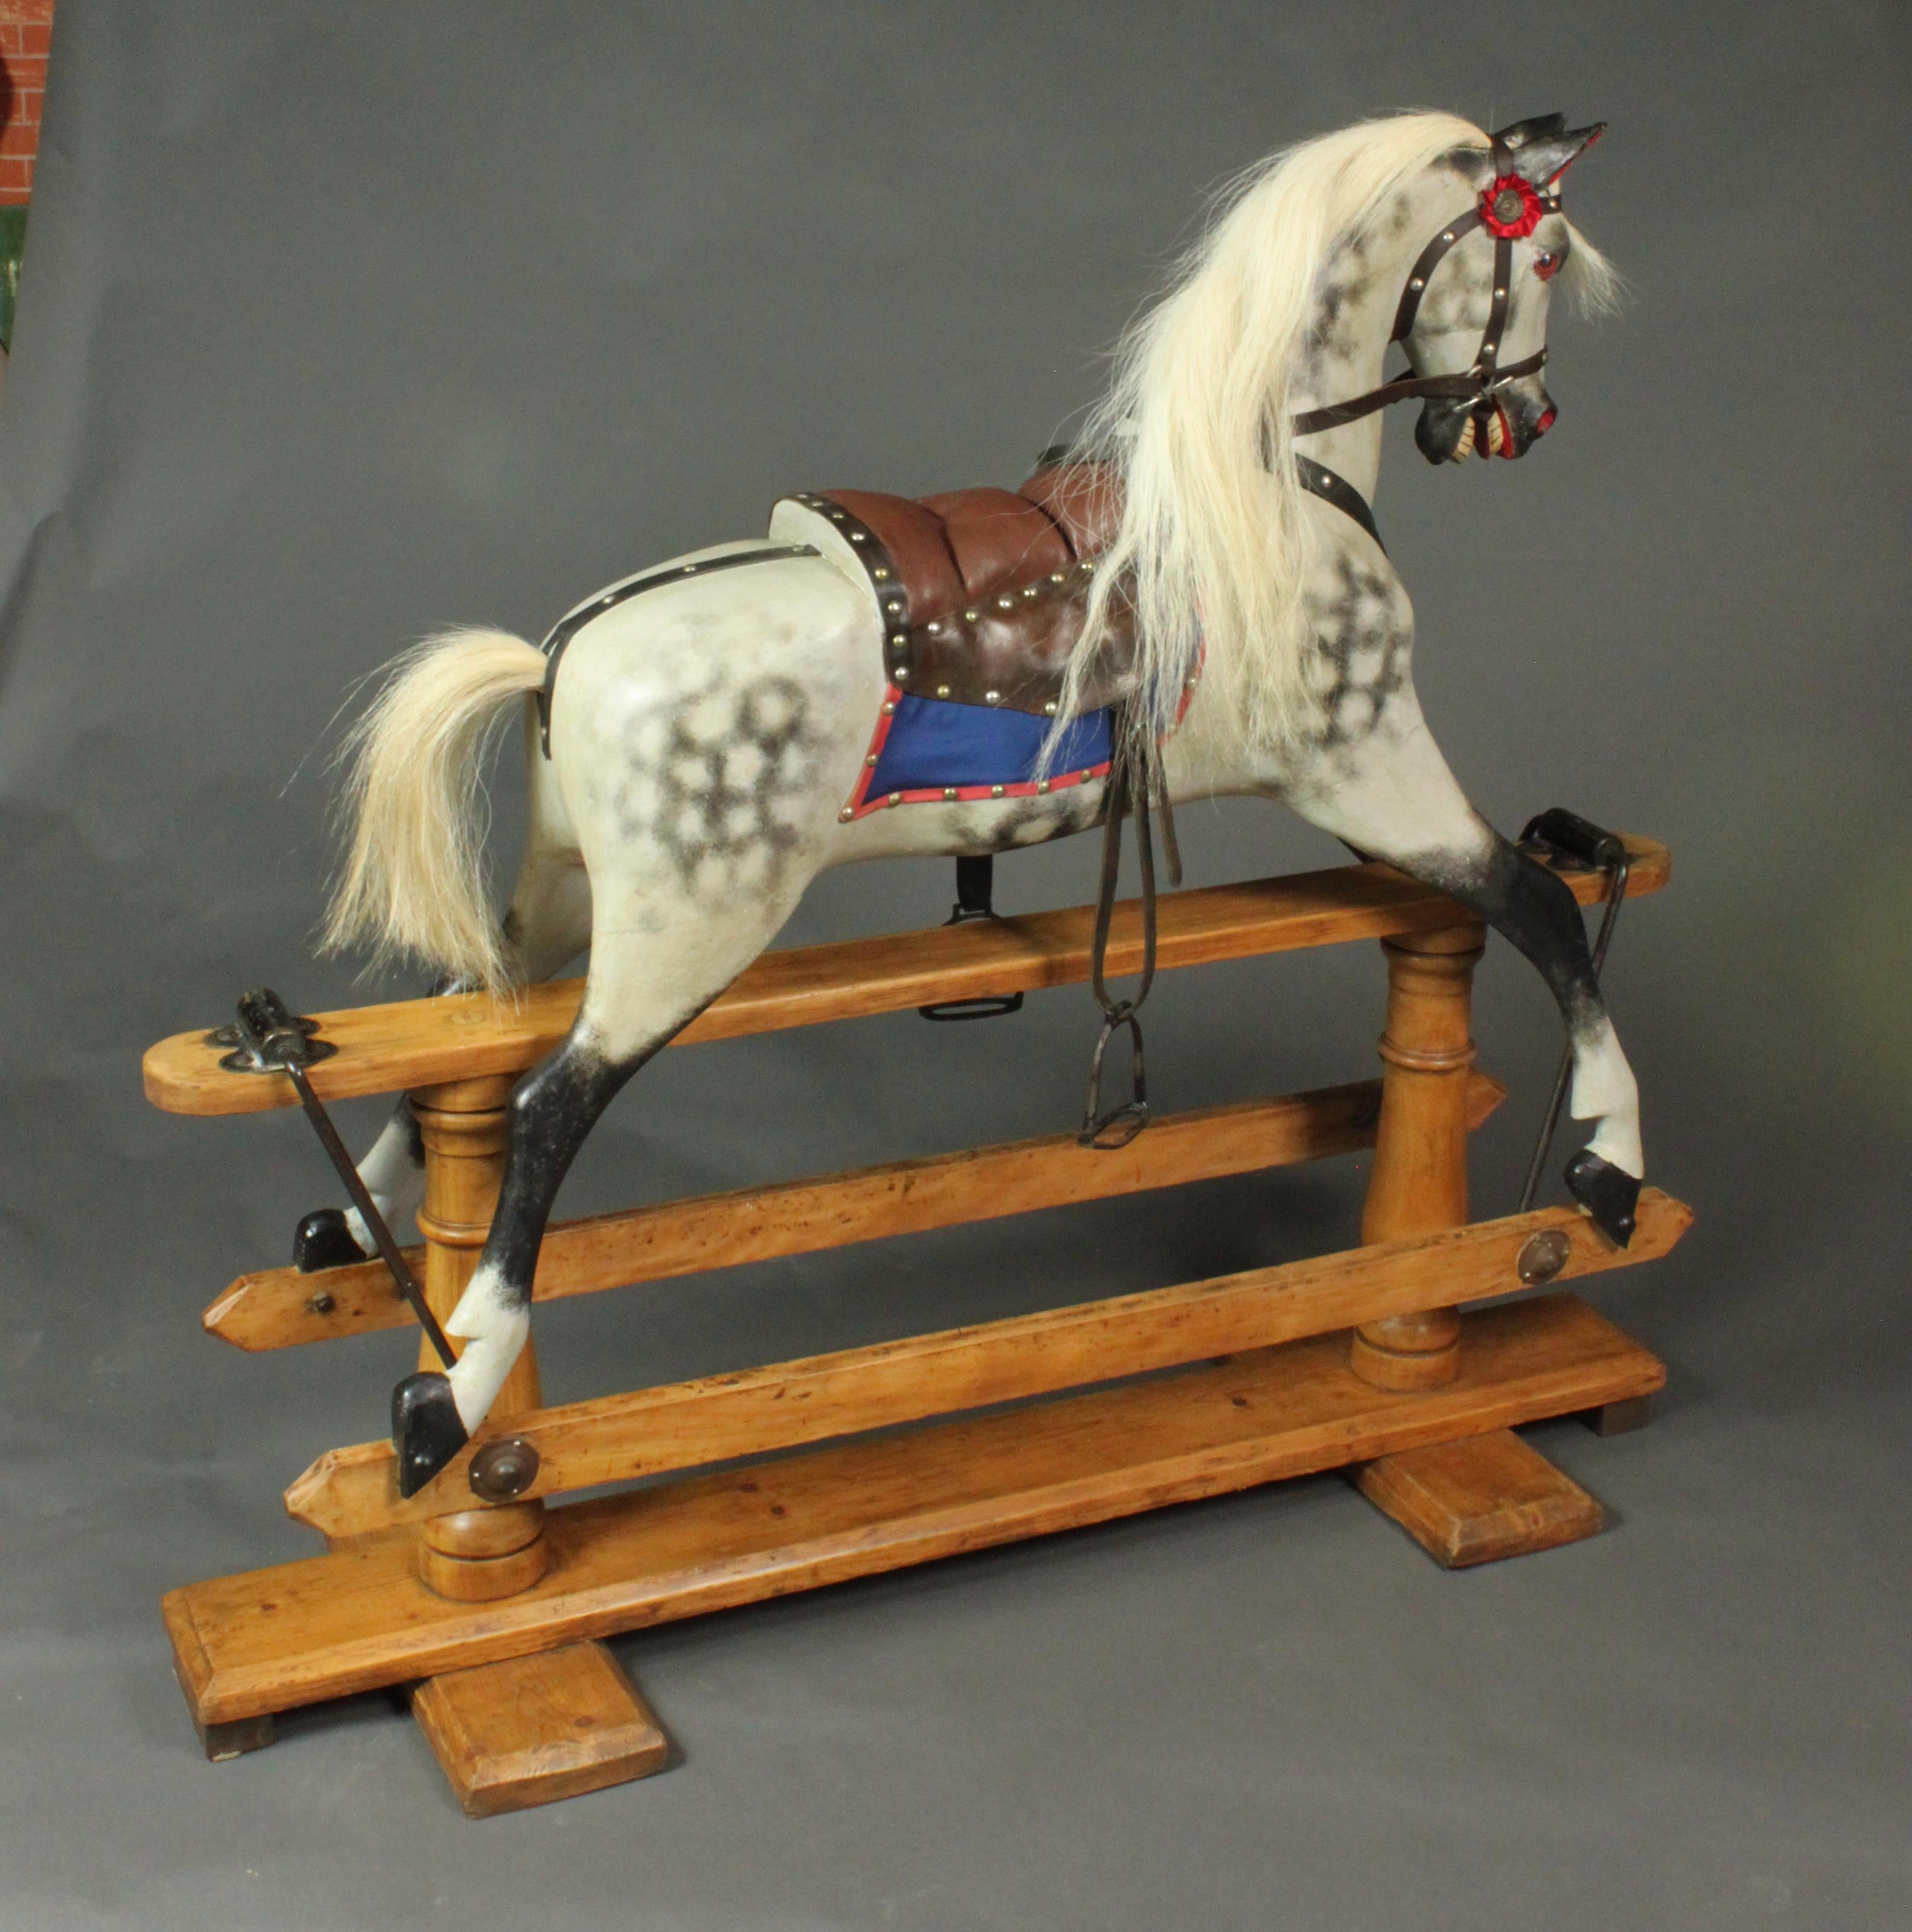 Hasrestored three rocking horses ready for Christmas.
This is the earliest and most elegant of the three and was made by Lines Brothers in circa 1920.
It is the Sportiboy model and is on a wooden stand with turned pillars and the head is slightly